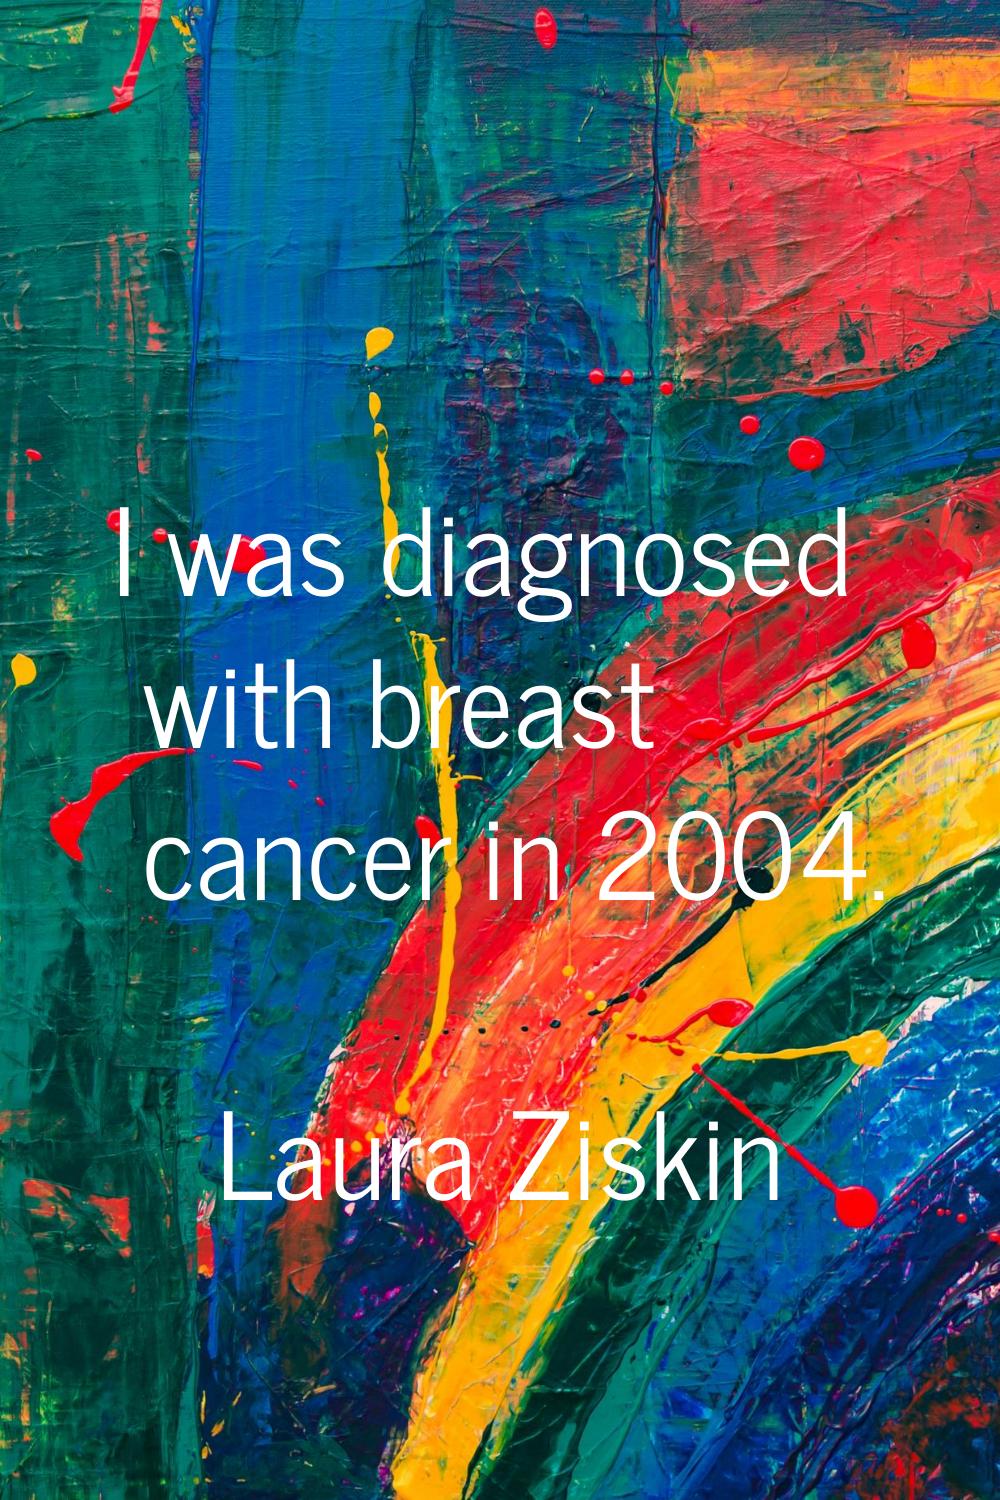 I was diagnosed with breast cancer in 2004.